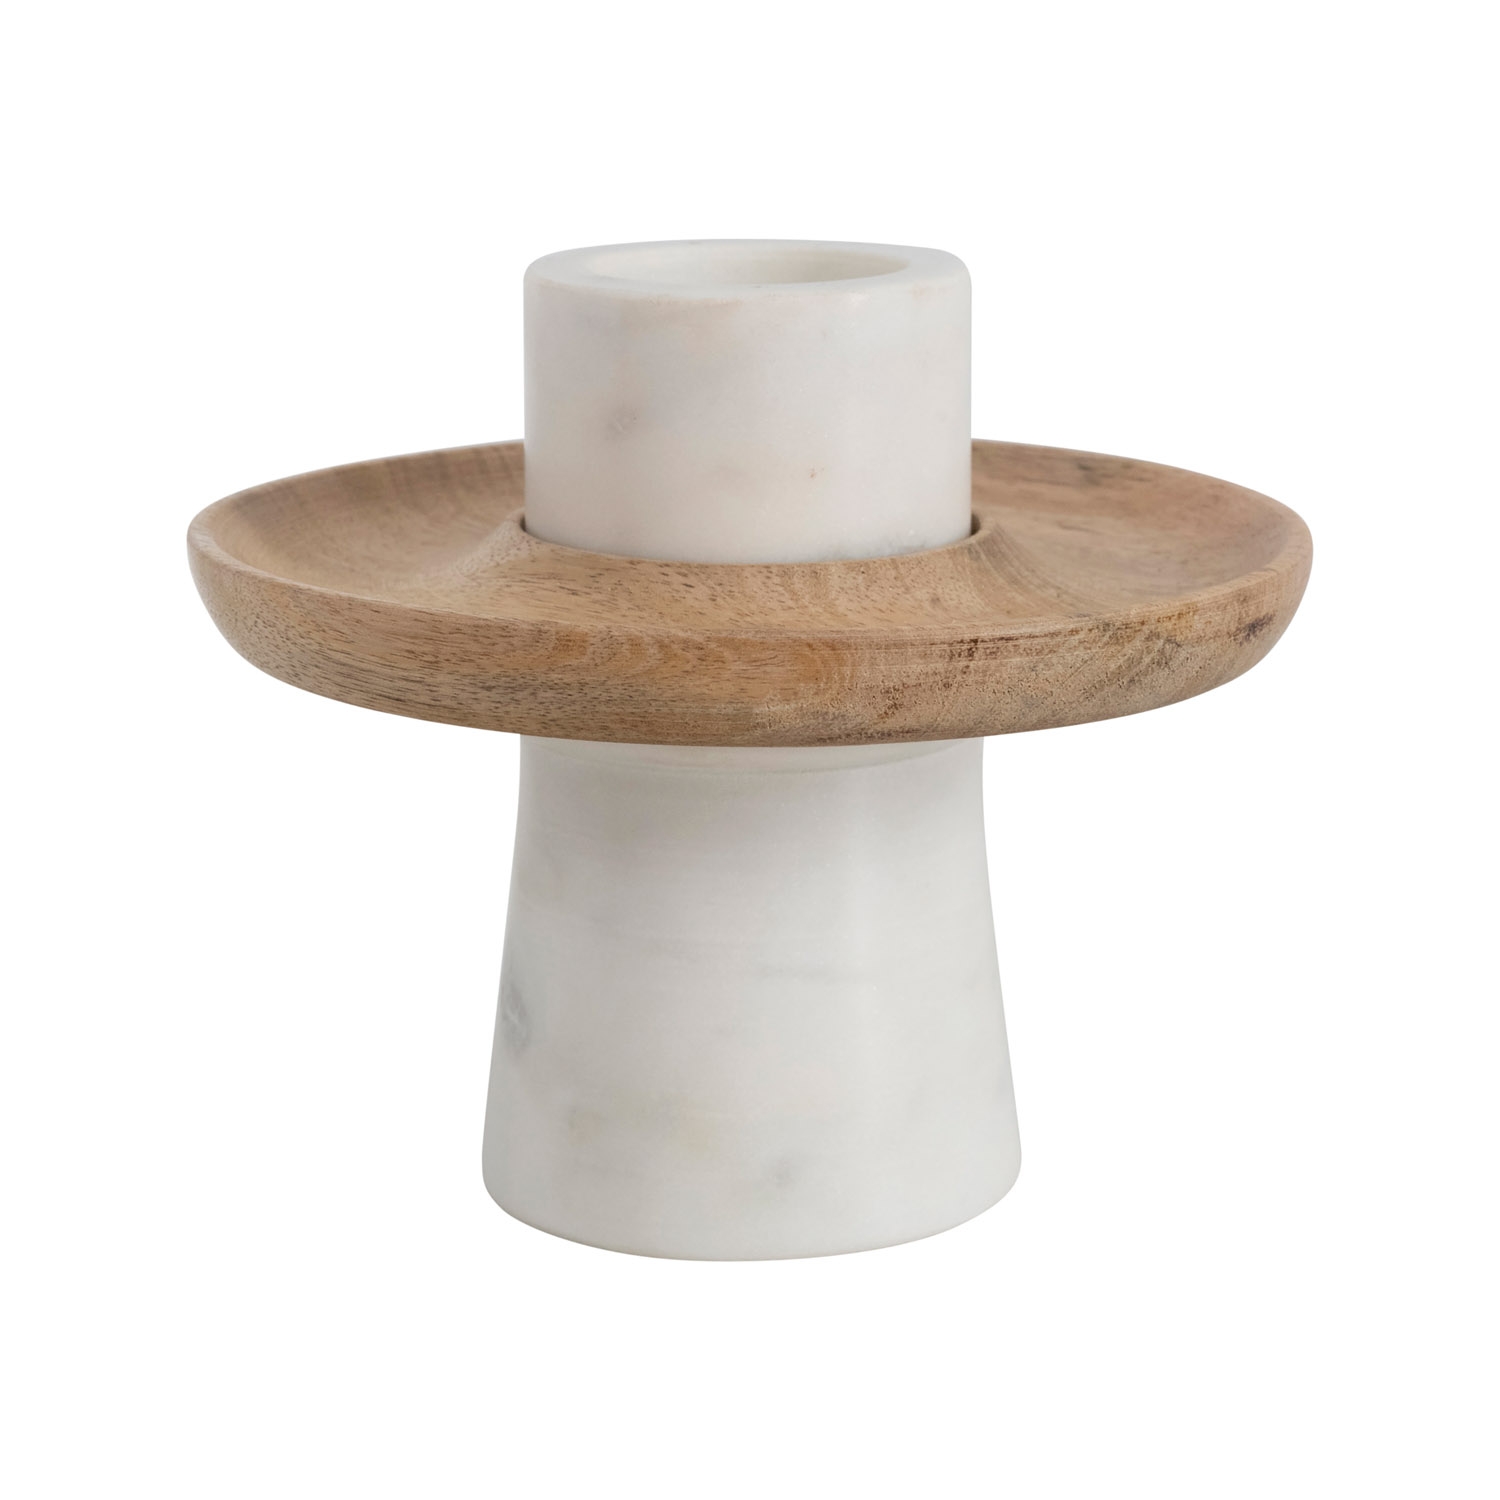 Mango wood tray with white marble stand - Image 0